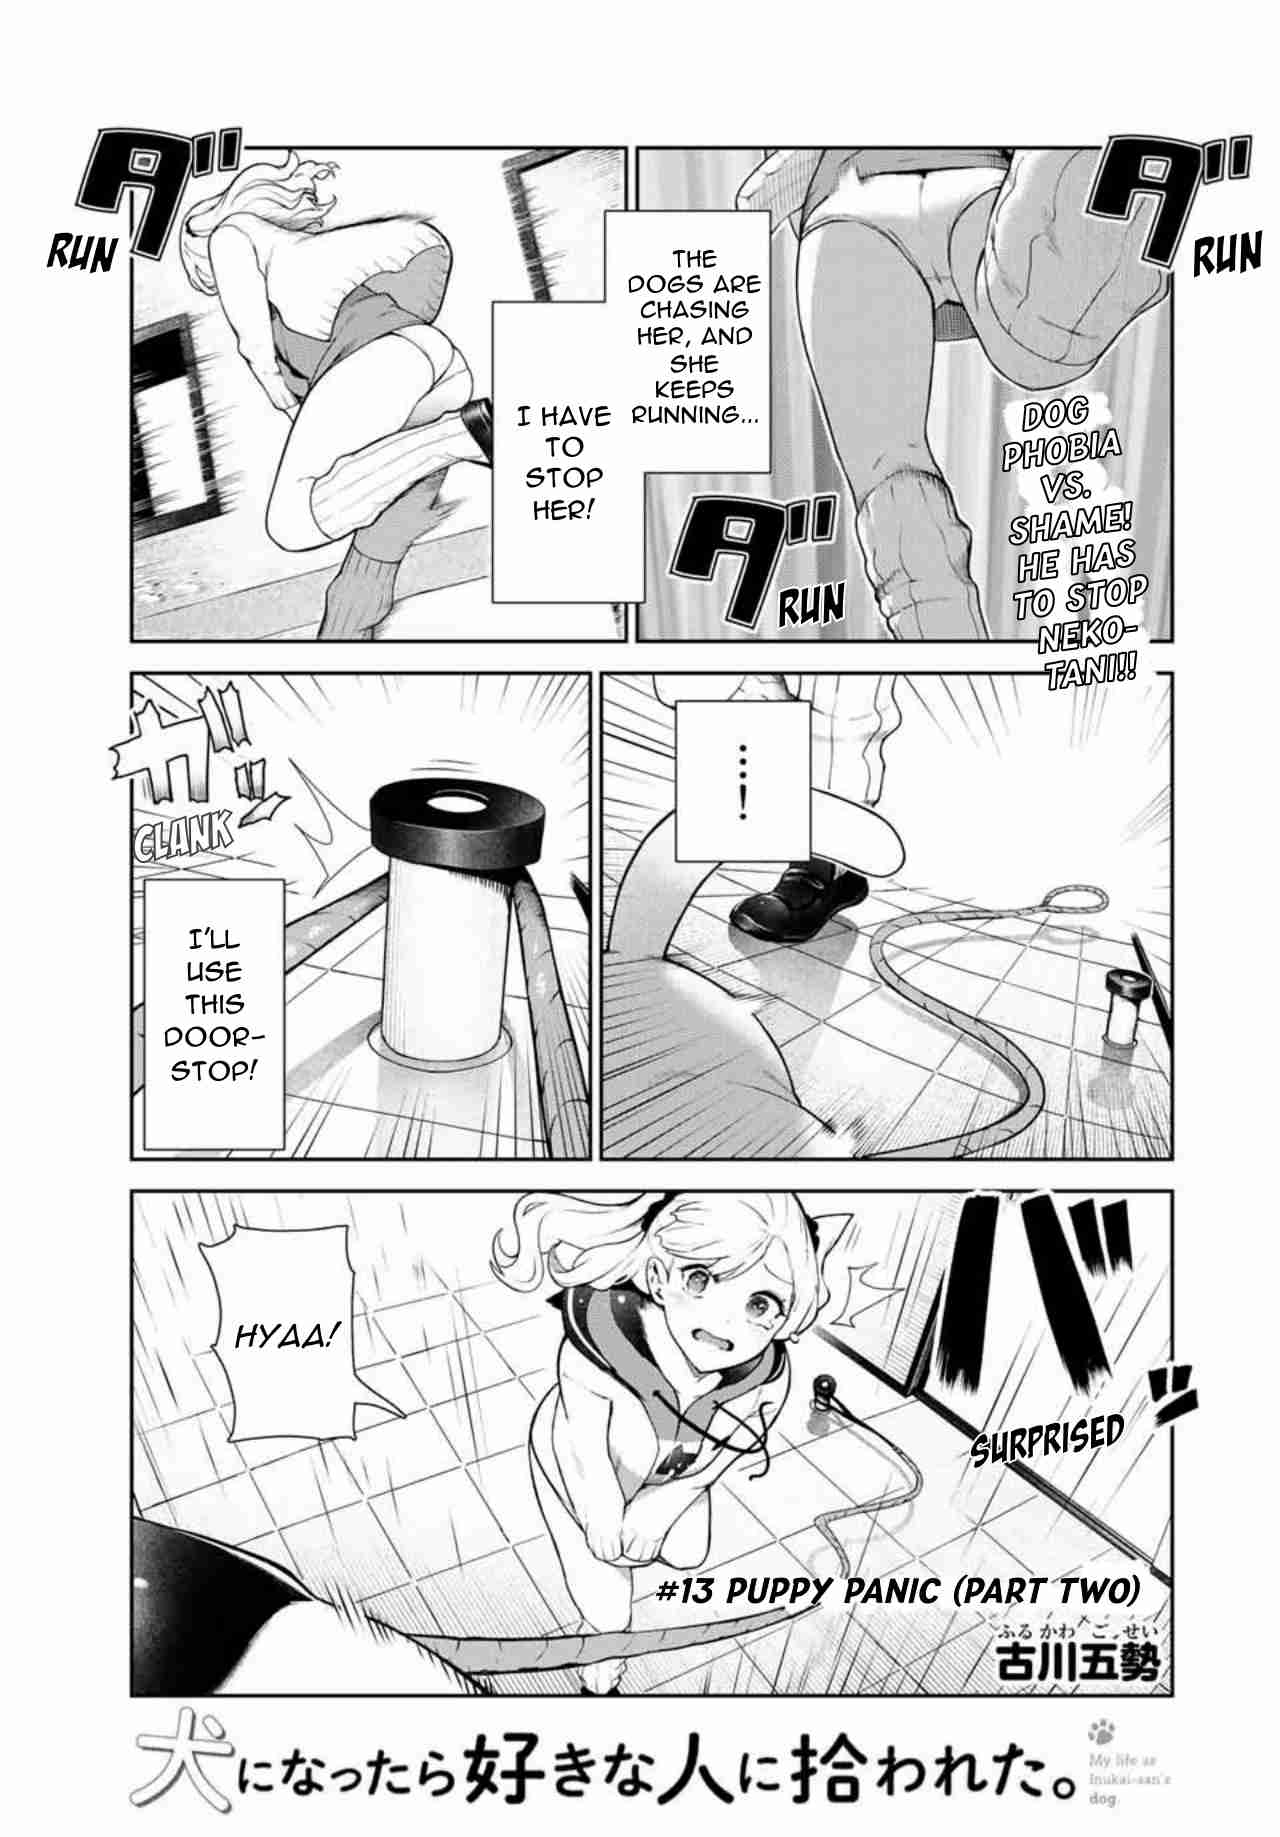 My Life as Inukai san's Dog Ch. 13.5 Puppy Panic (Part Two)